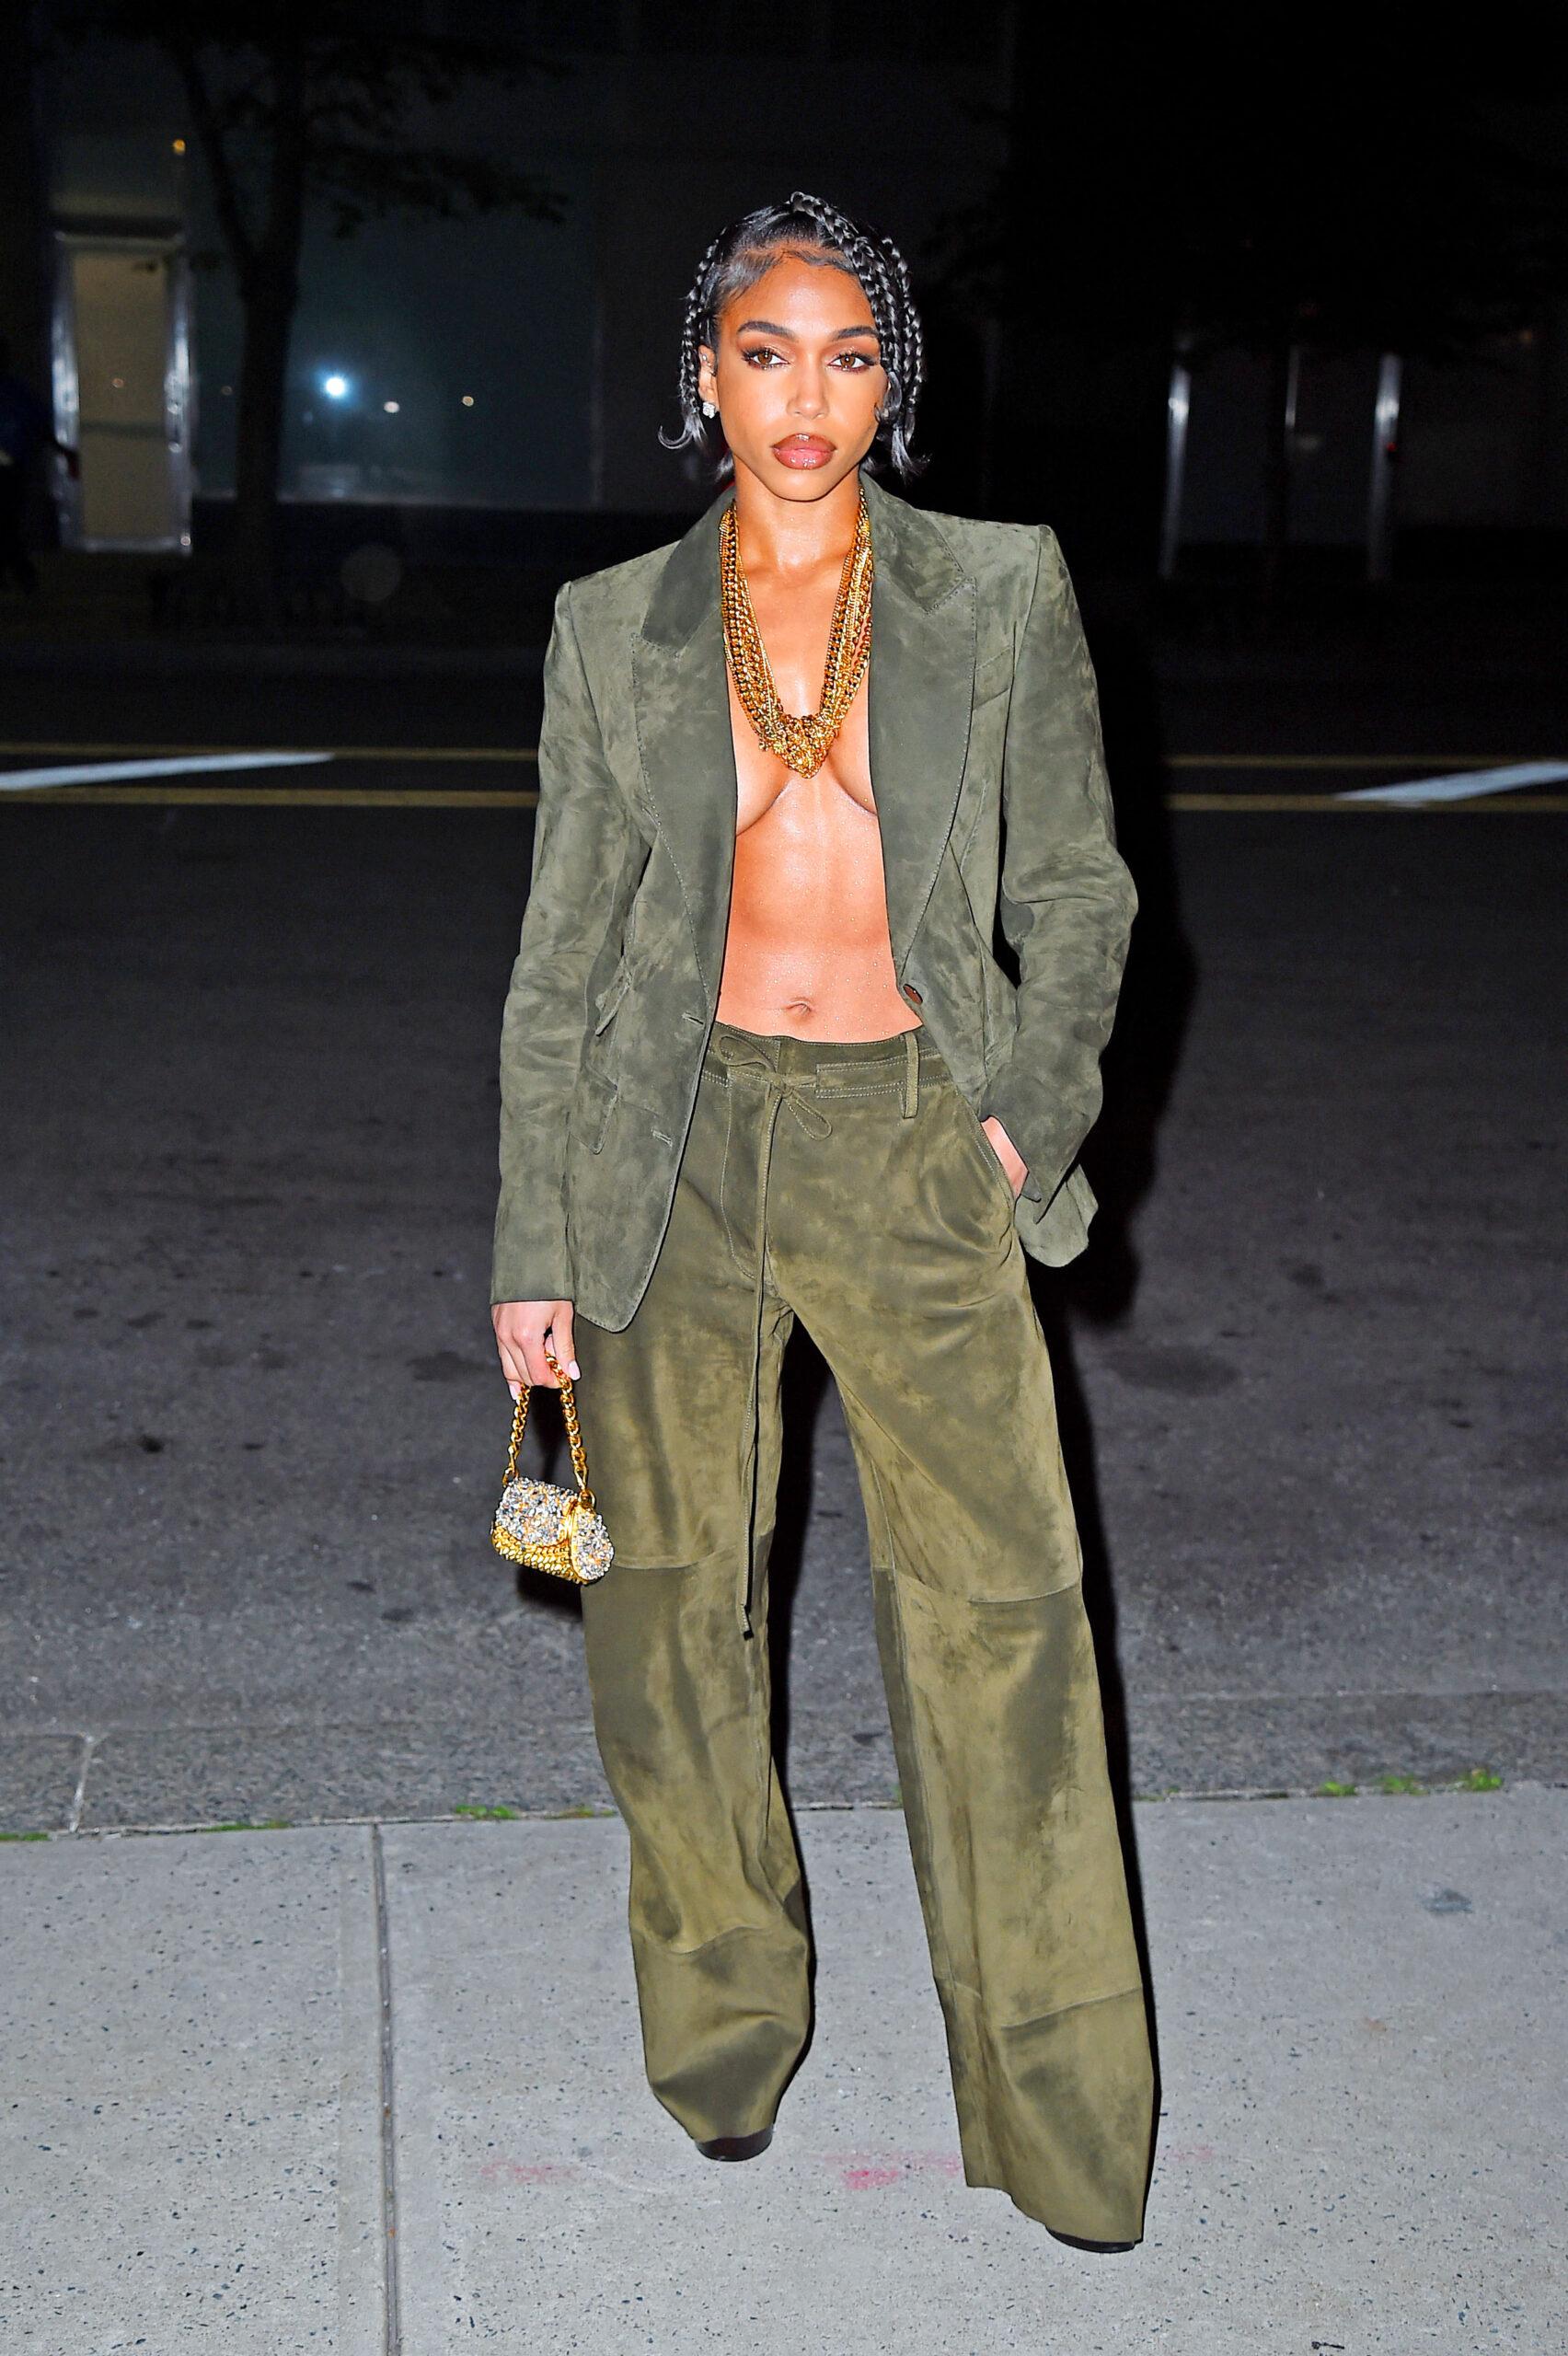 Lori Harvey goes braless for the Tom Ford fashion show in New York